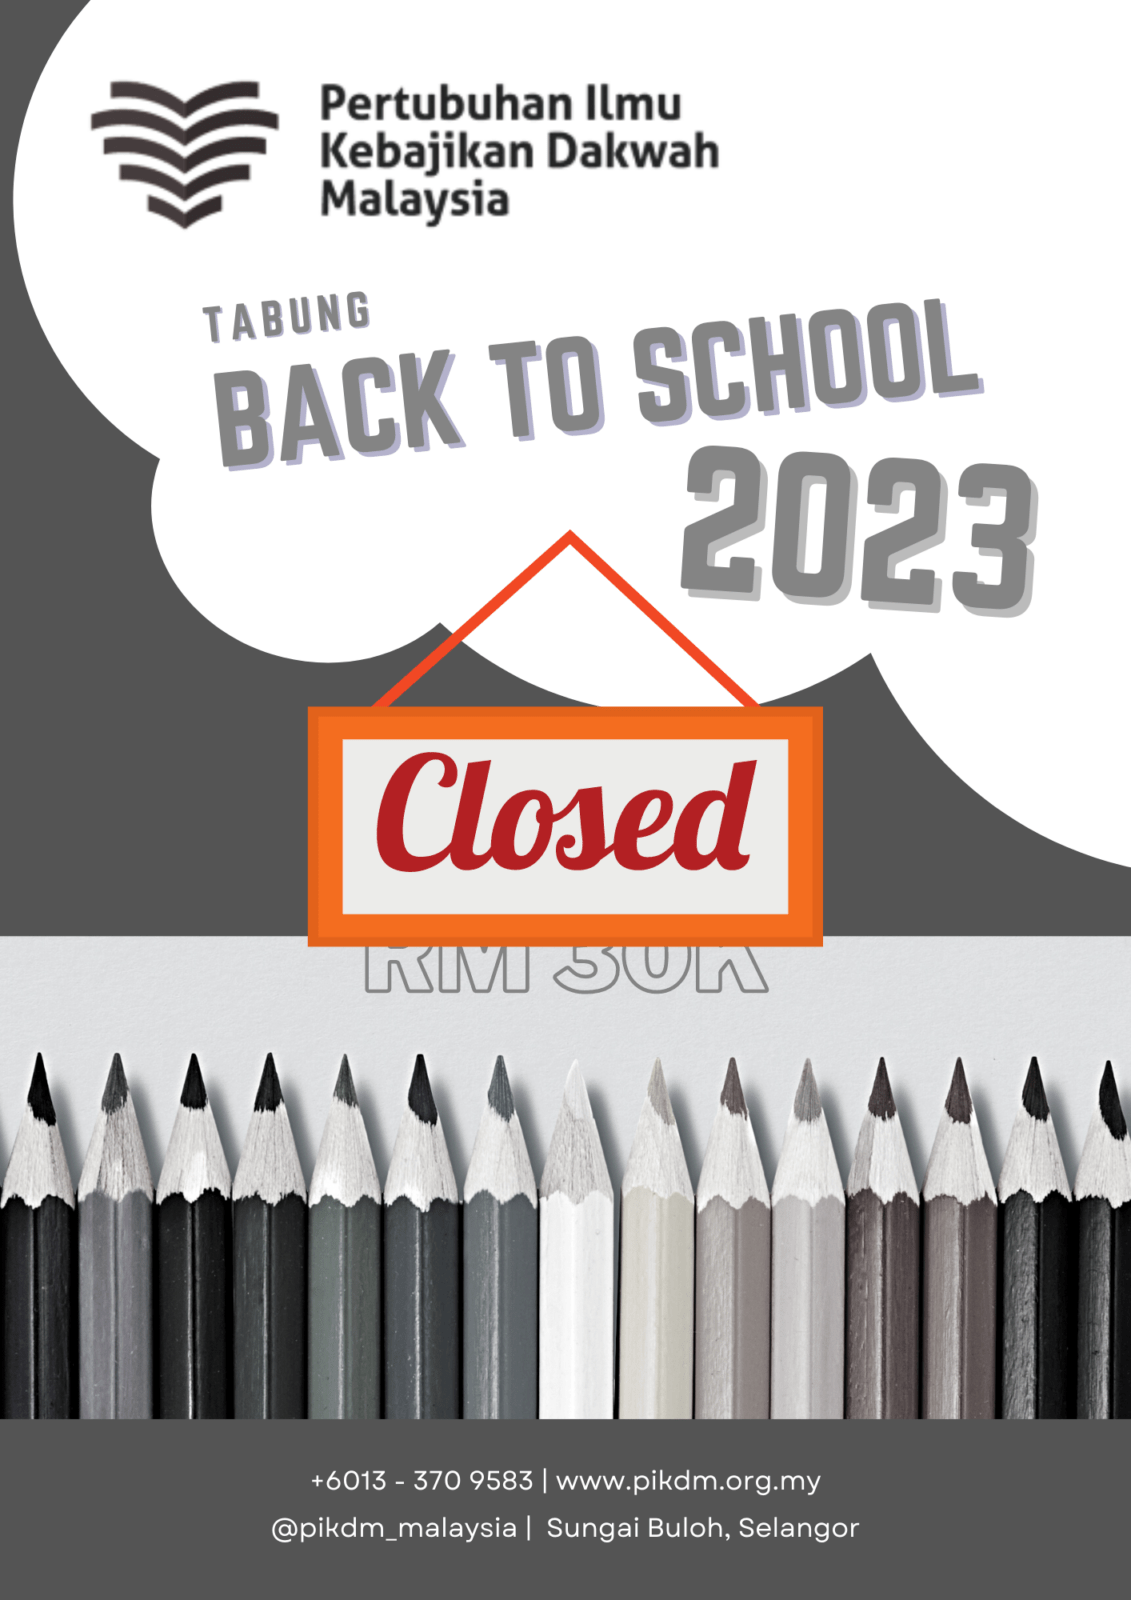 Tabung Back To School 2023 Closed